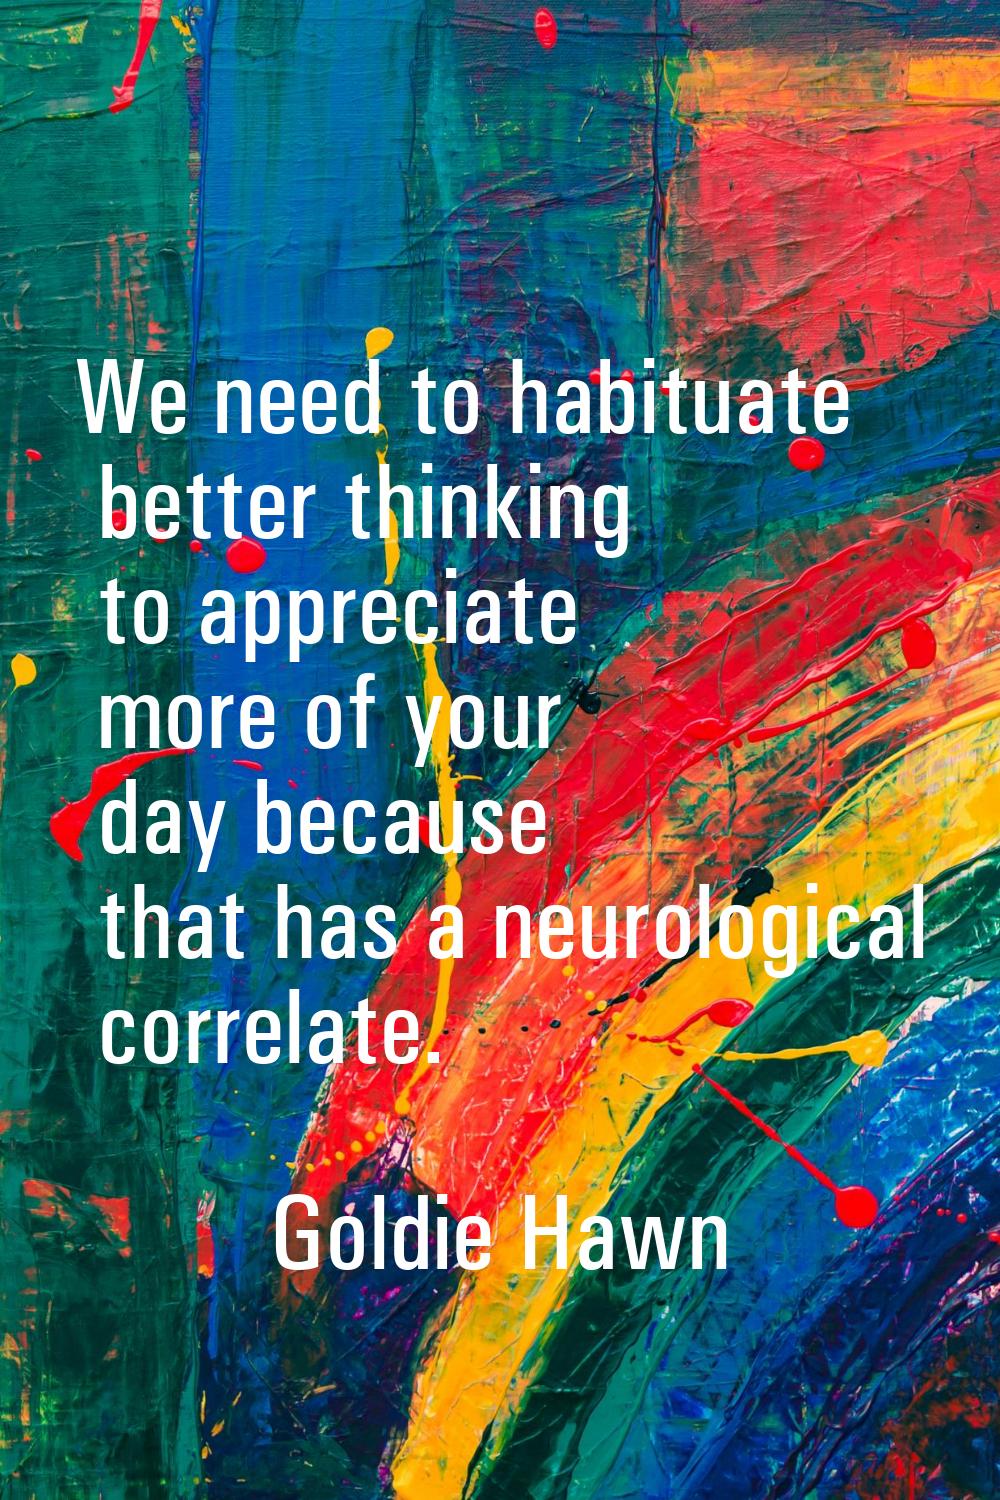 We need to habituate better thinking to appreciate more of your day because that has a neurological